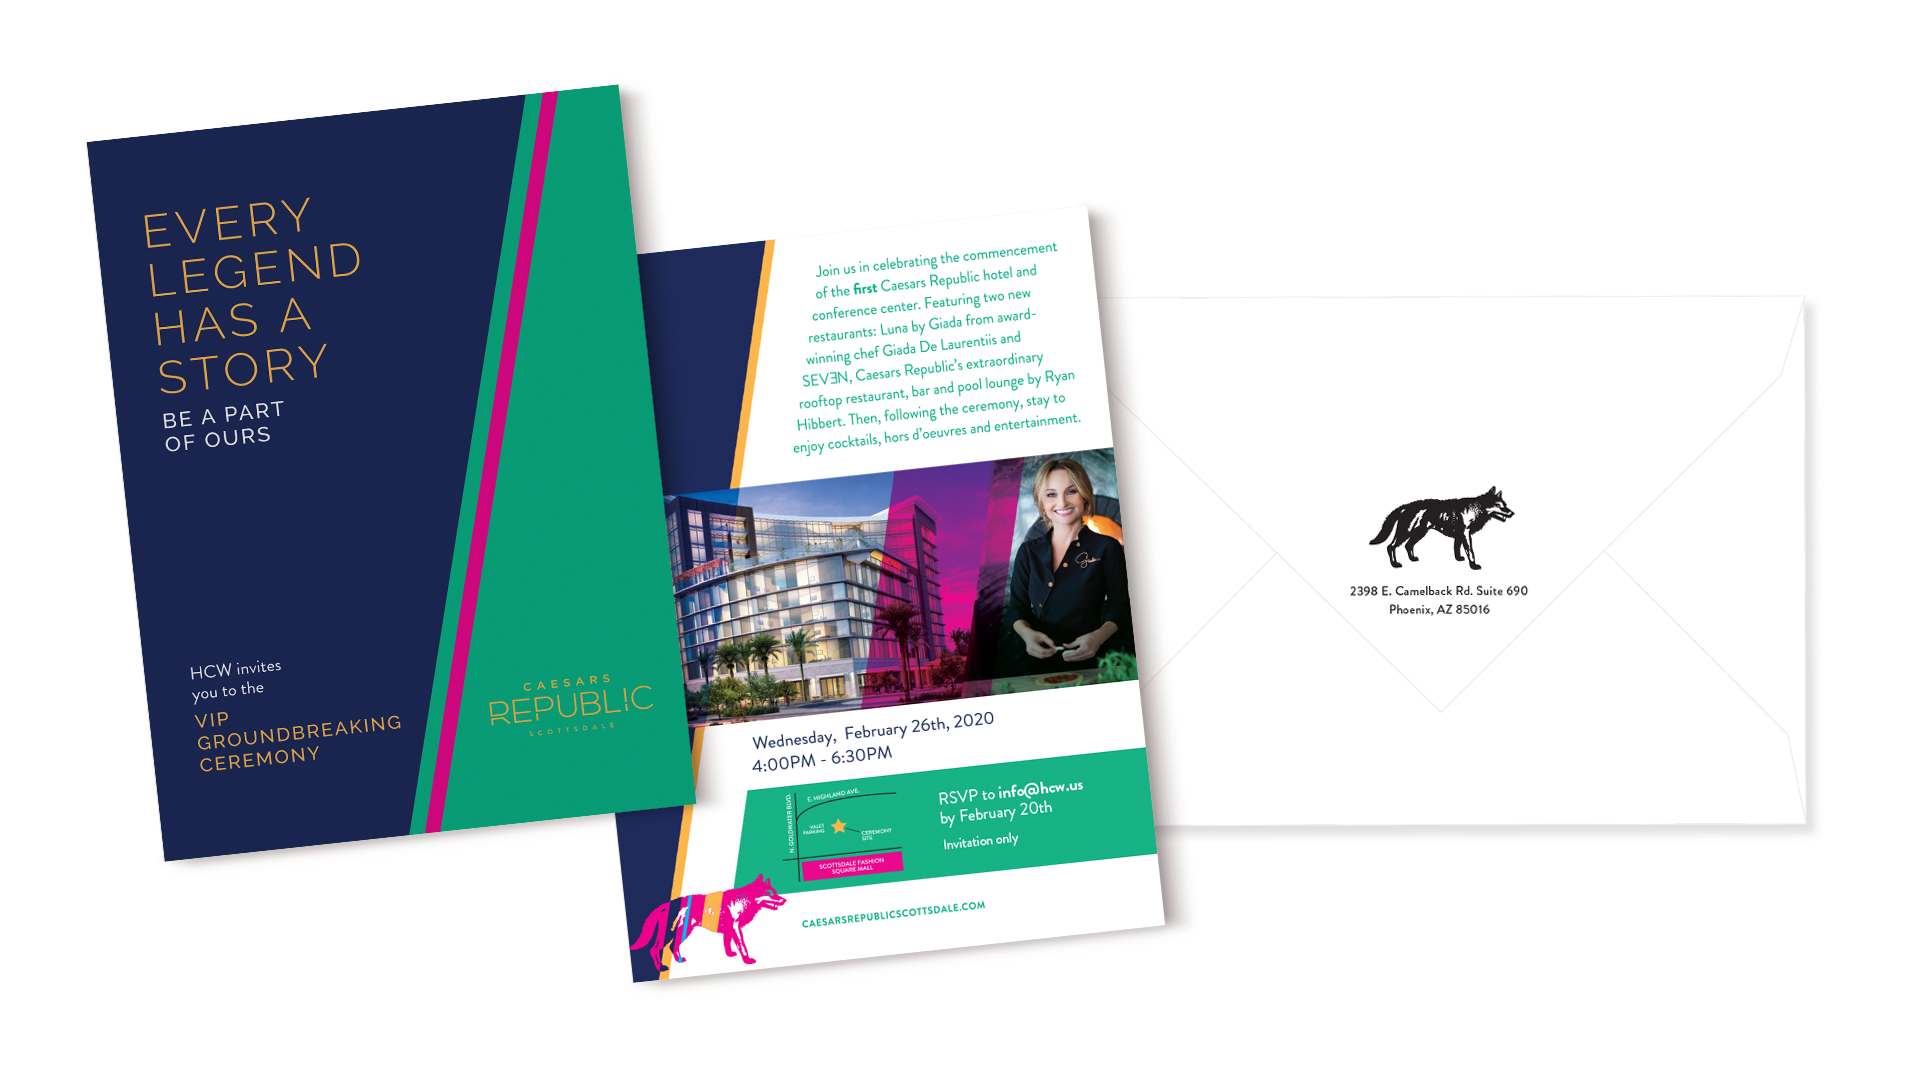 featured image two:Caesars Republic Groundbreaking Event Collateral